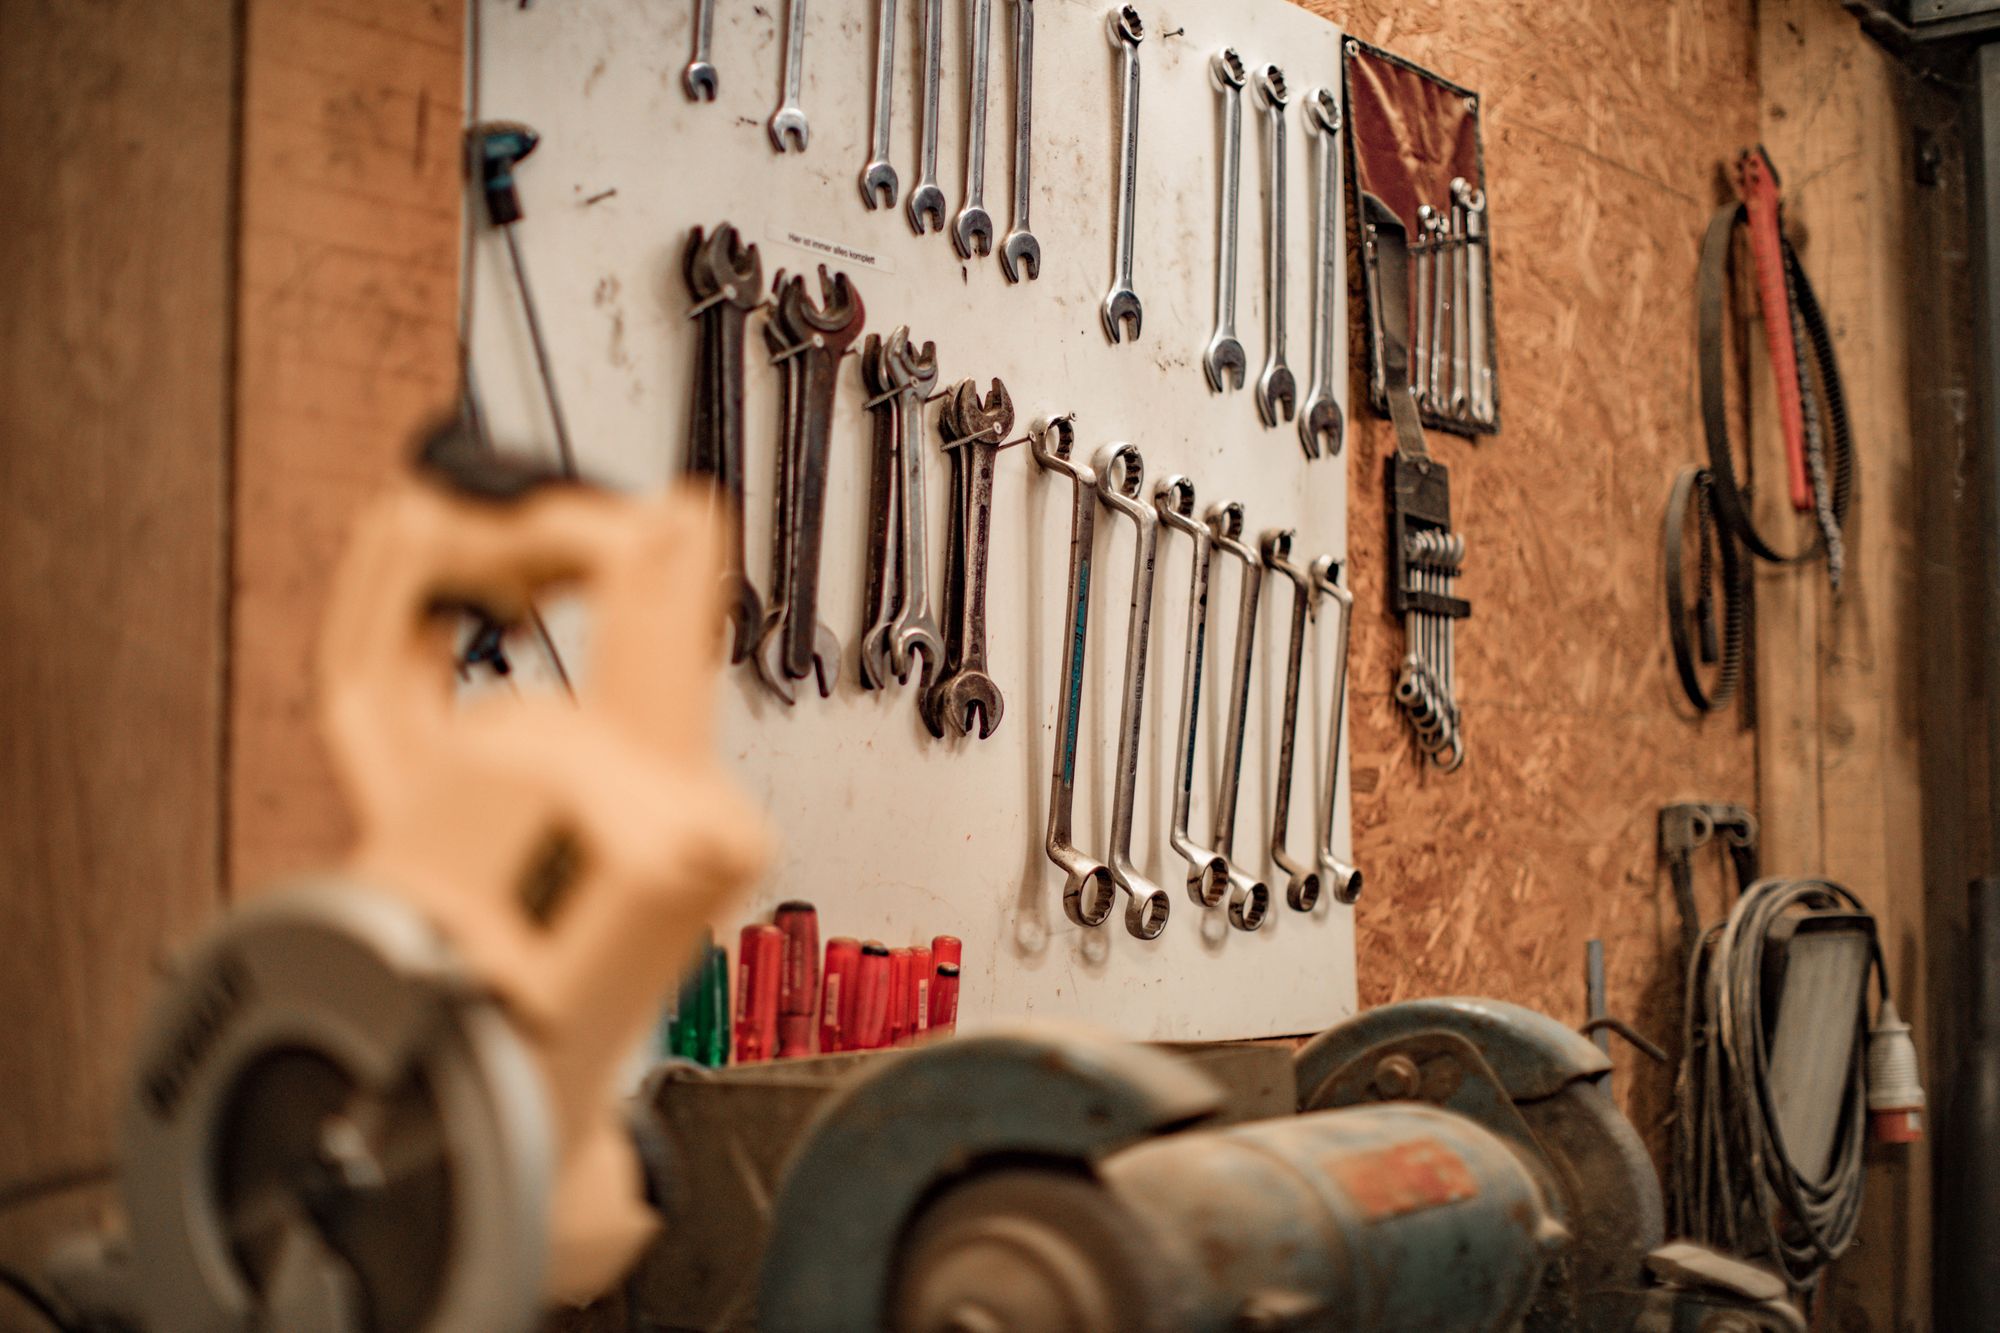 Wrenches and tools hanging on the wall.